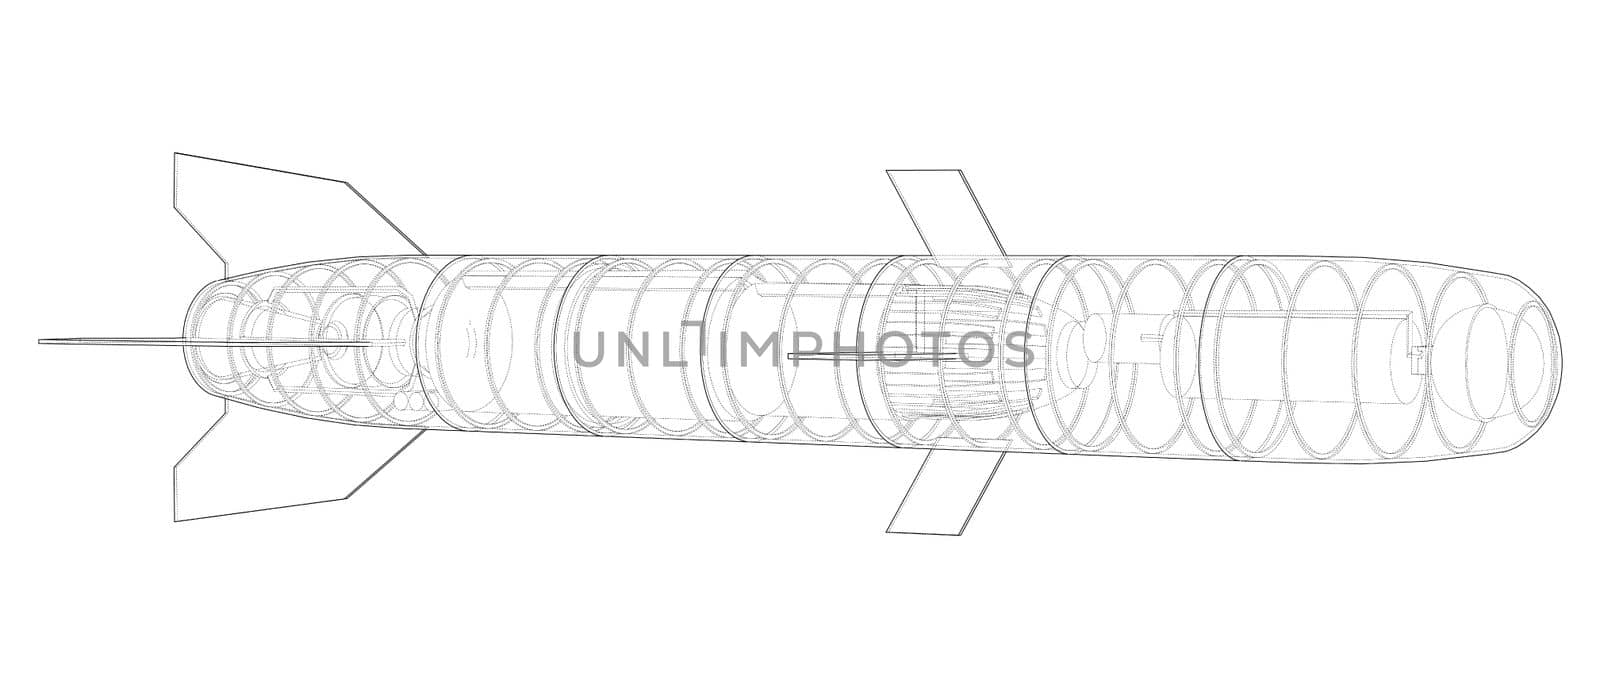 Military missile army rocket. Military concept. 3d illustration. Wire-frame style